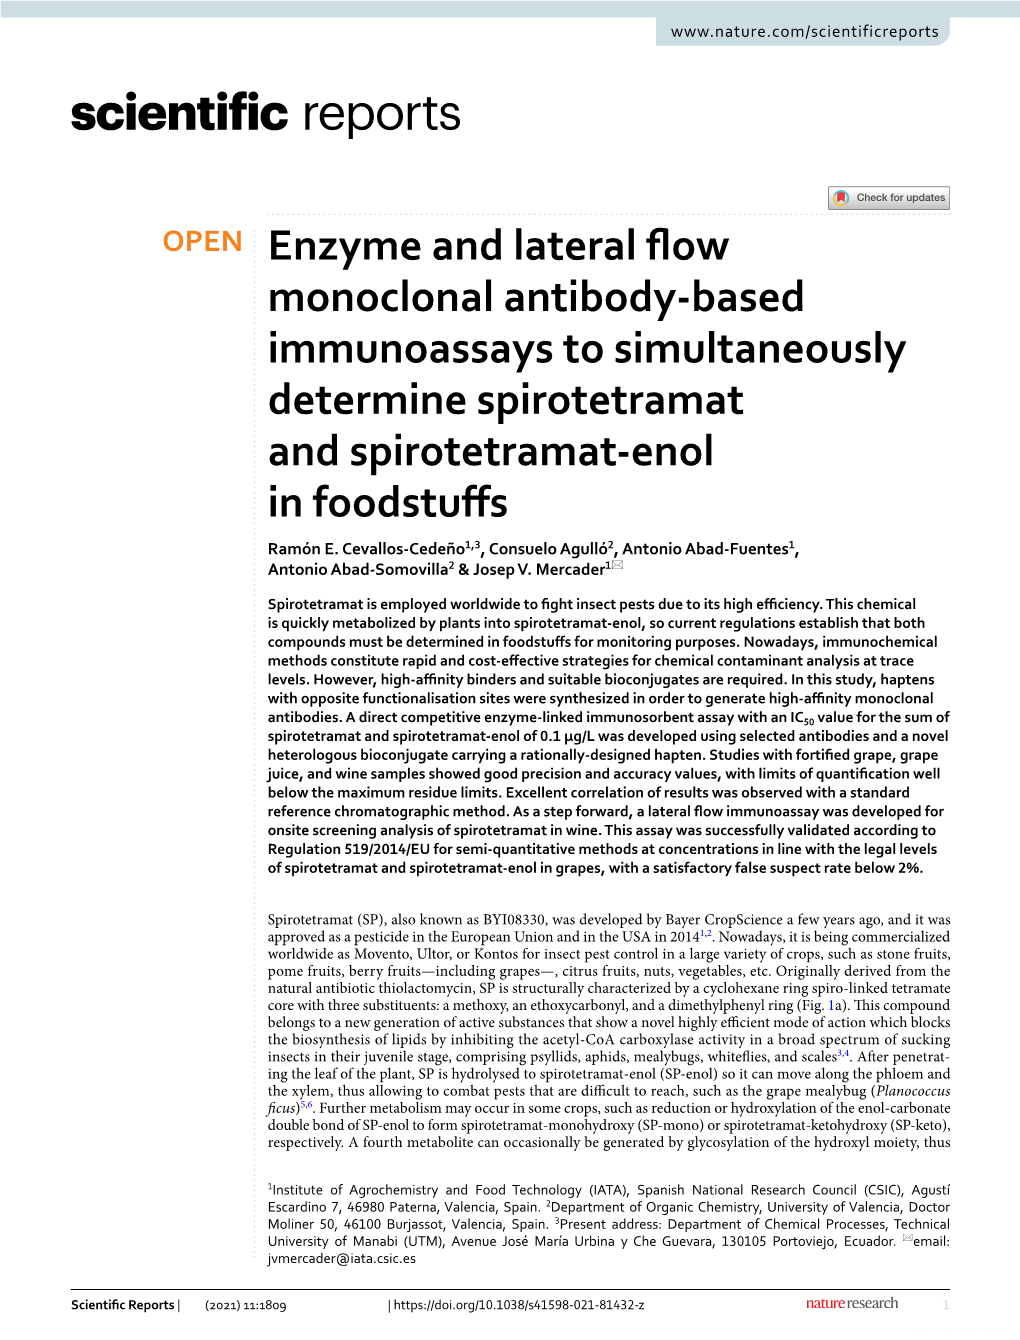 Enzyme and Lateral Flow Monoclonal Antibody-Based Immunoassays To